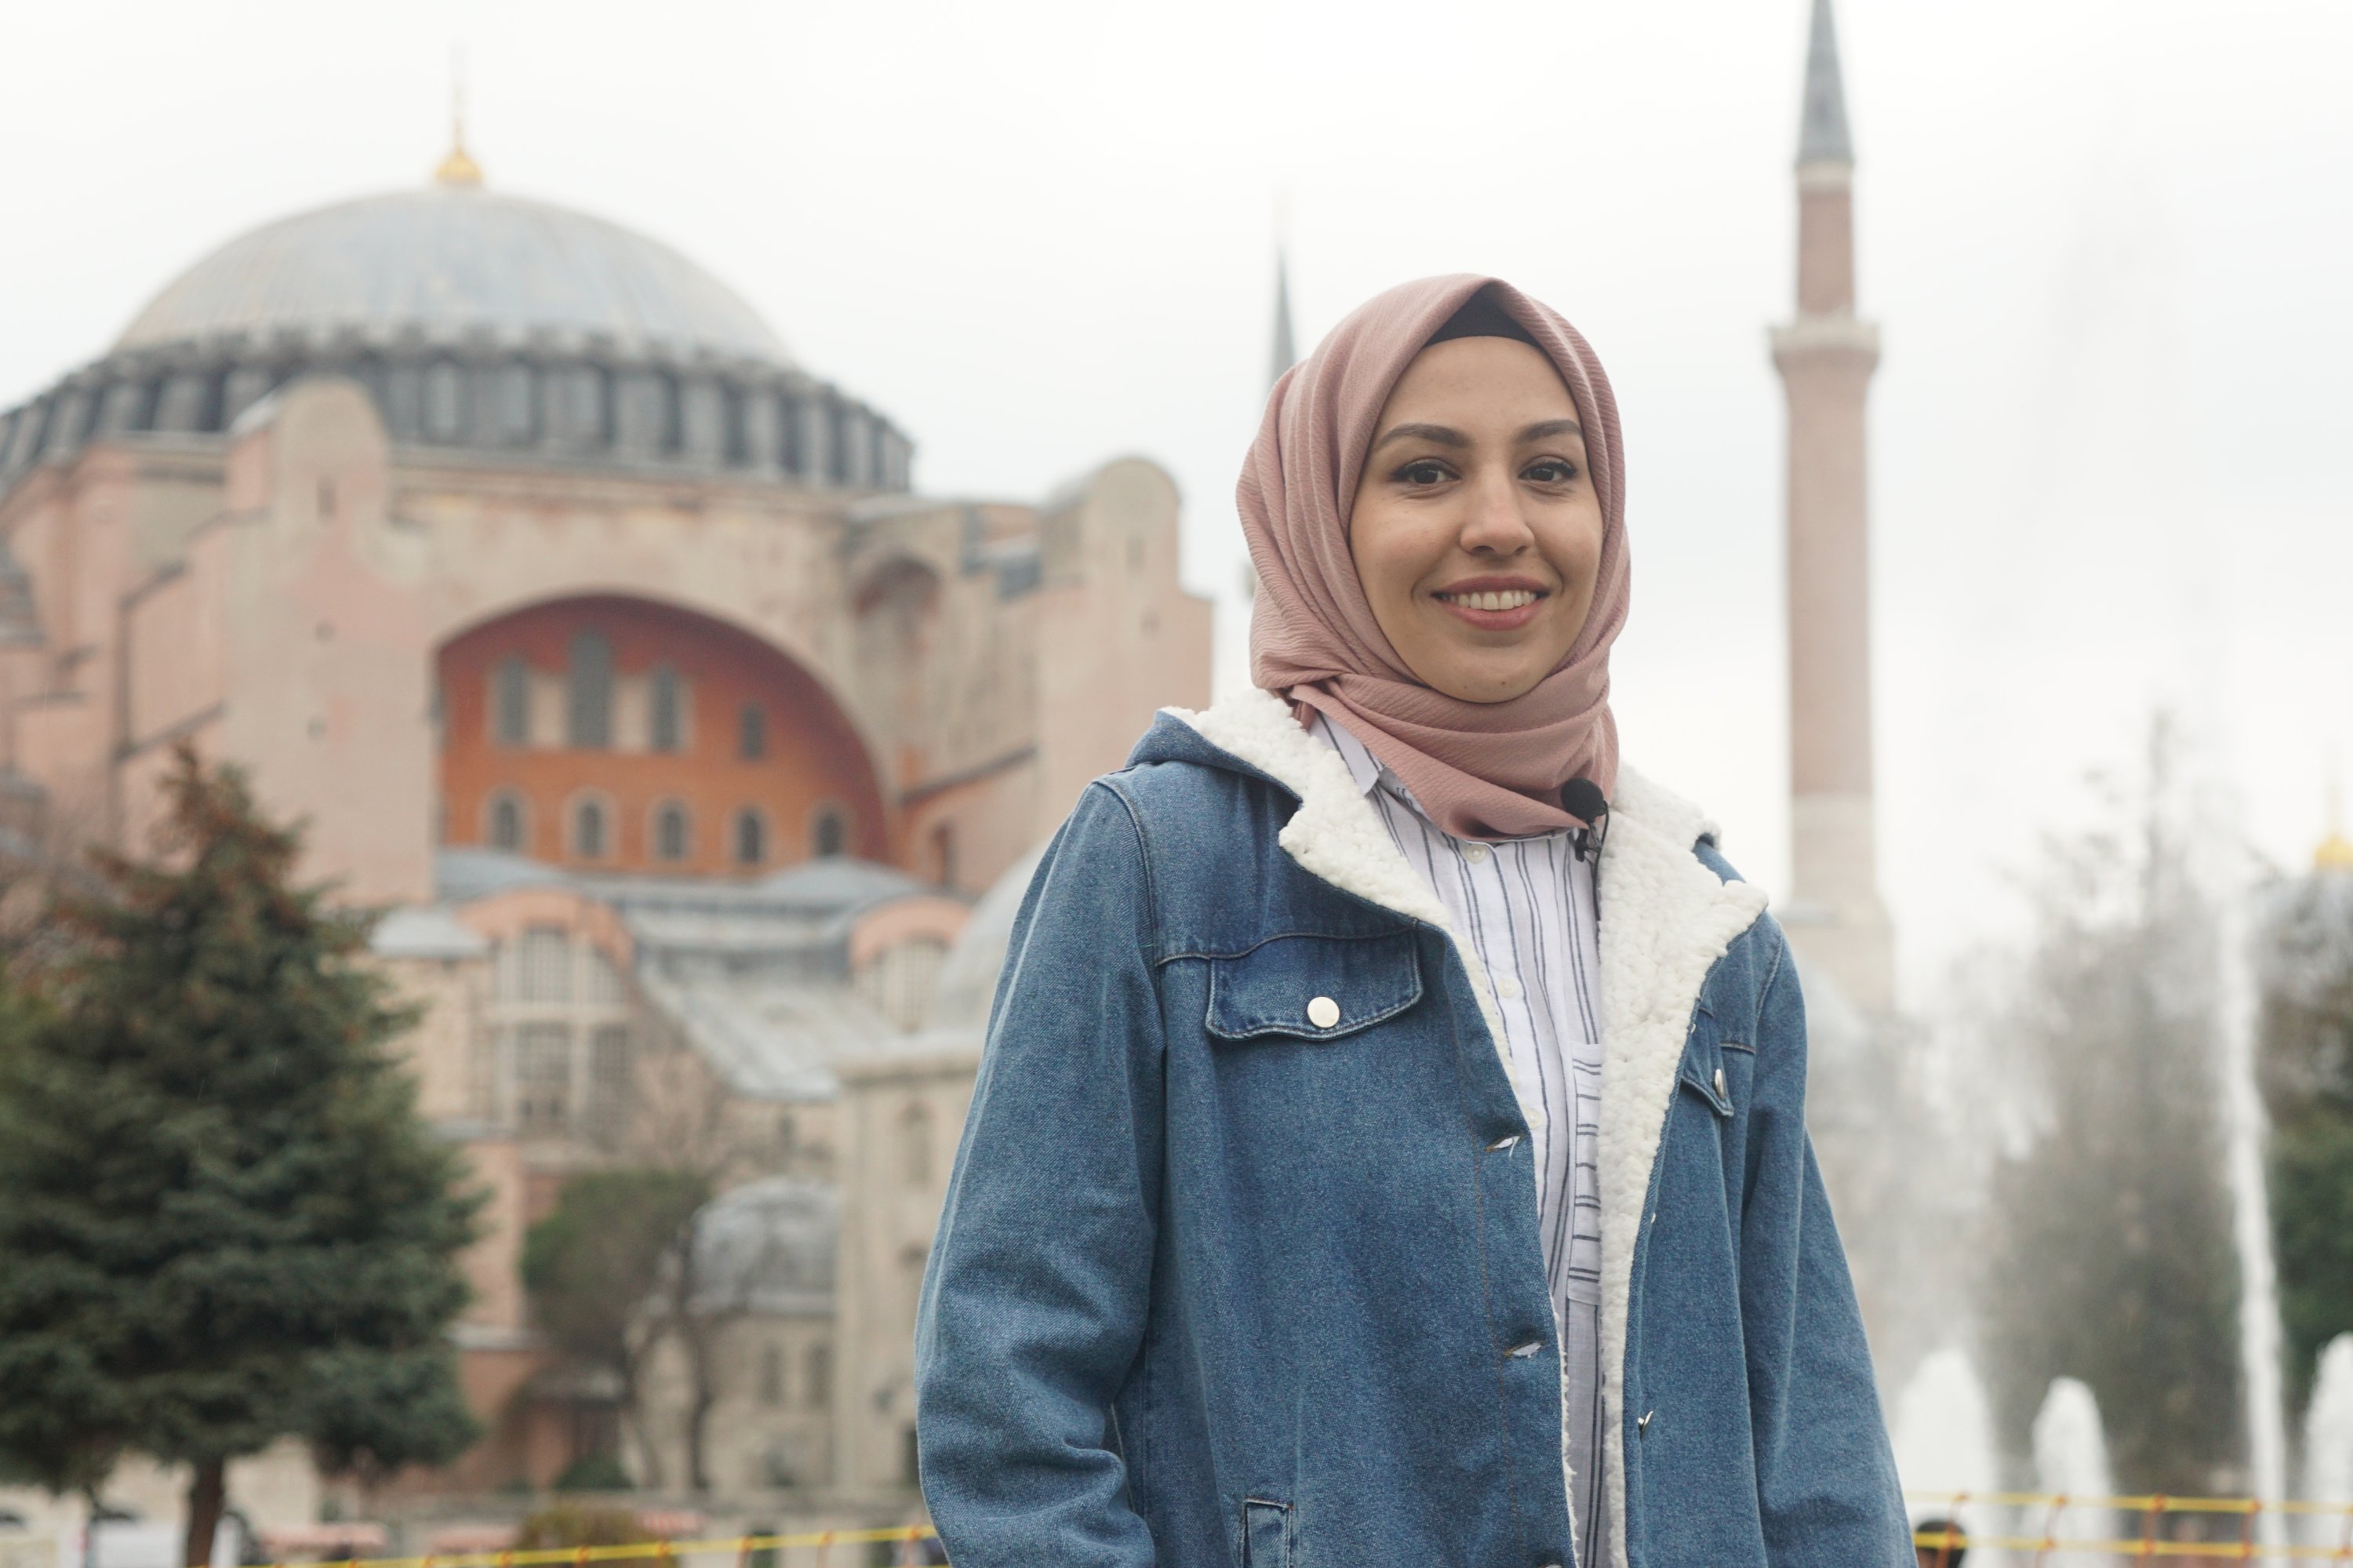 Afghan animation artist Sara Barackzay poses in front of the Hagia Sophia Grand Mosque in Istanbul, Jan. 22, 2021. (AA PHOTO)